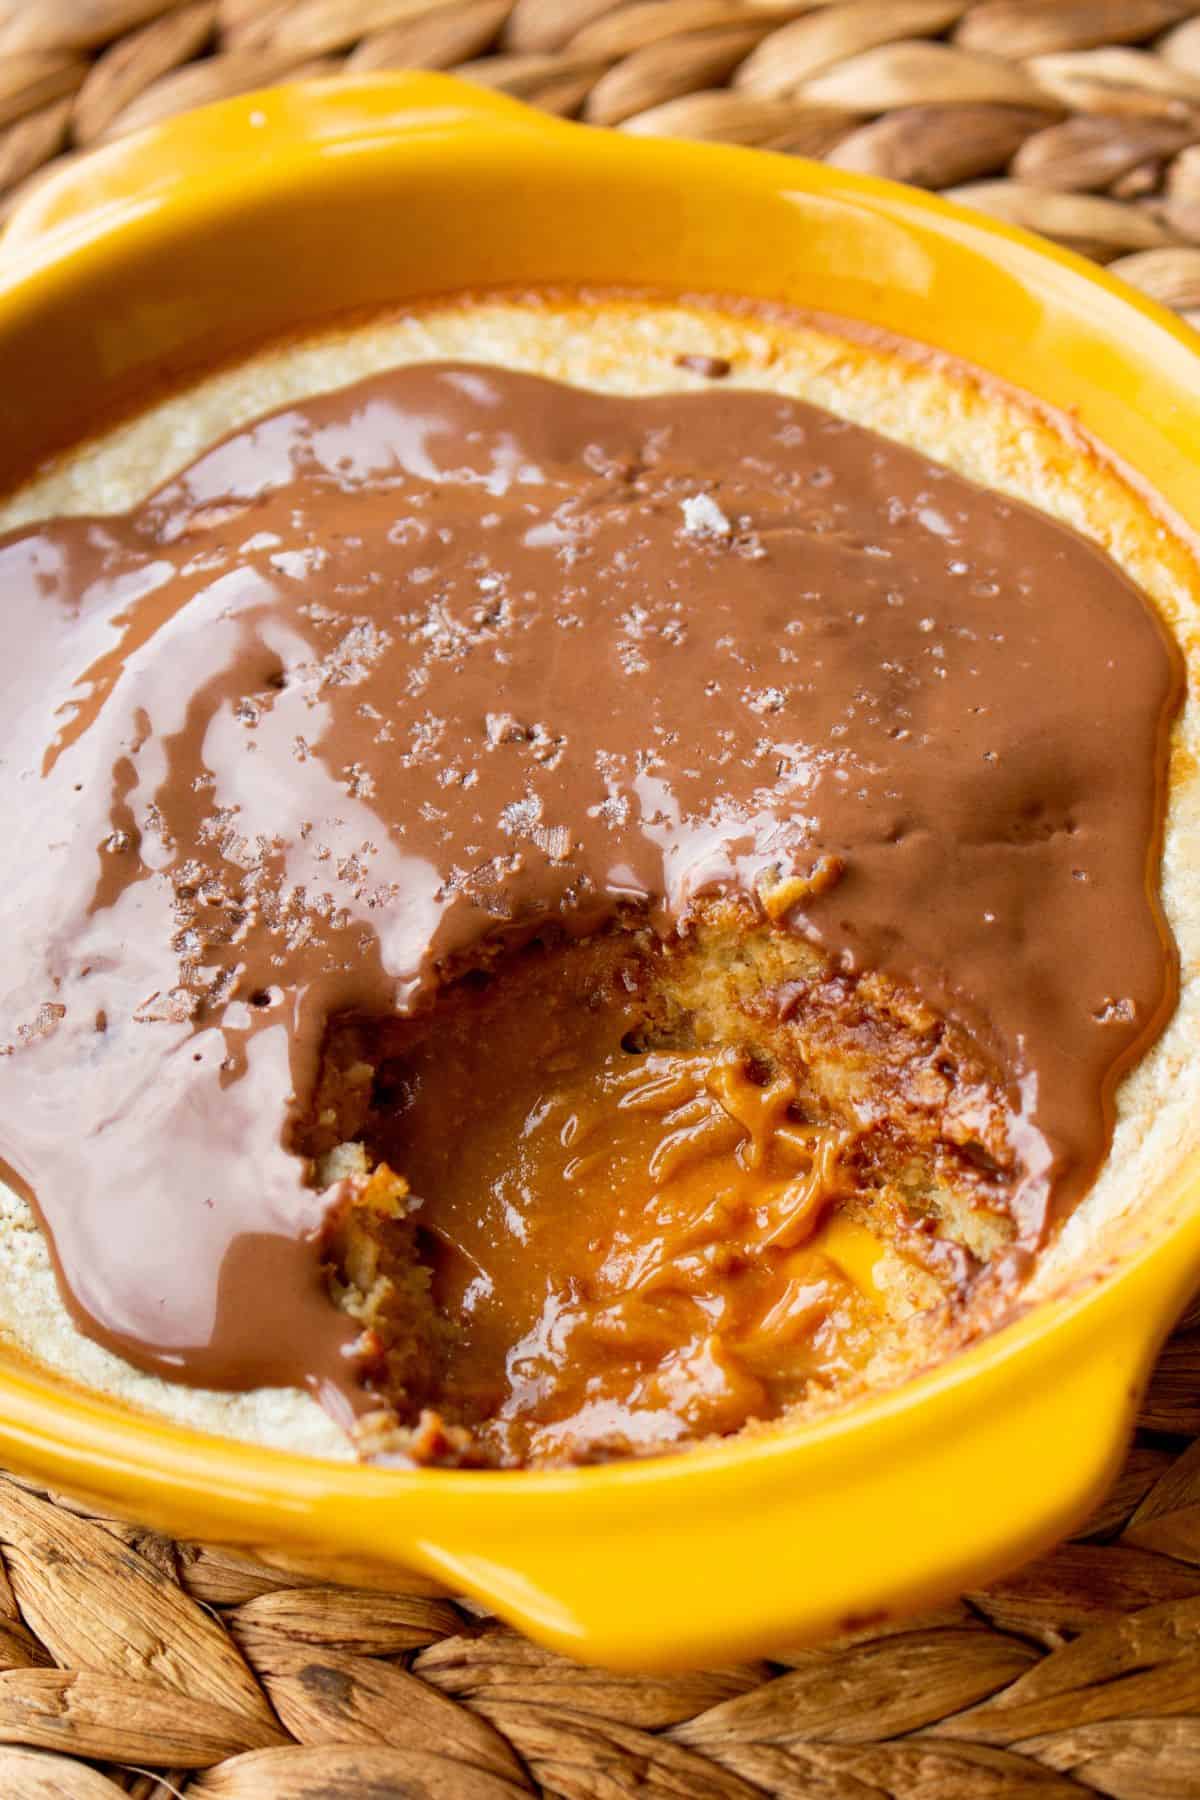 A yellow ramekin with the baked oats with a melted chocolate topping with a piece taken showing the gooey peanut centre on a straw heat mat.